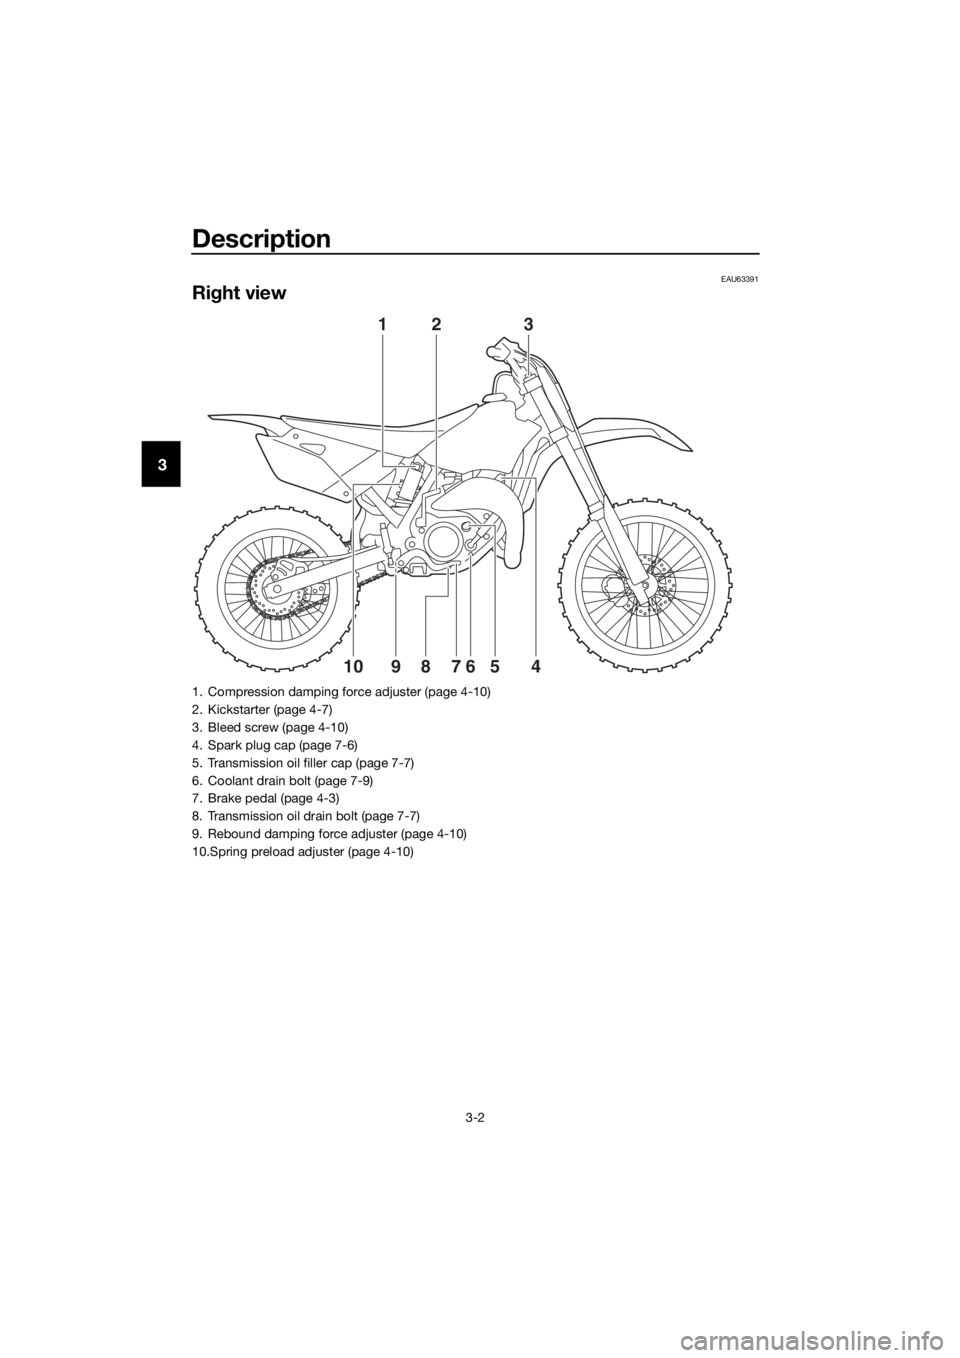 YAMAHA YZ85 2018  Owners Manual Description
3-2
3
EAU63391
Right view
1
7
6894105
23
1. Compression damping force adjuster (page 4-10)
2. Kickstarter (page 4-7)
3. Bleed screw (page 4-10)
4. Spark plug cap (page 7-6)
5. Transmission